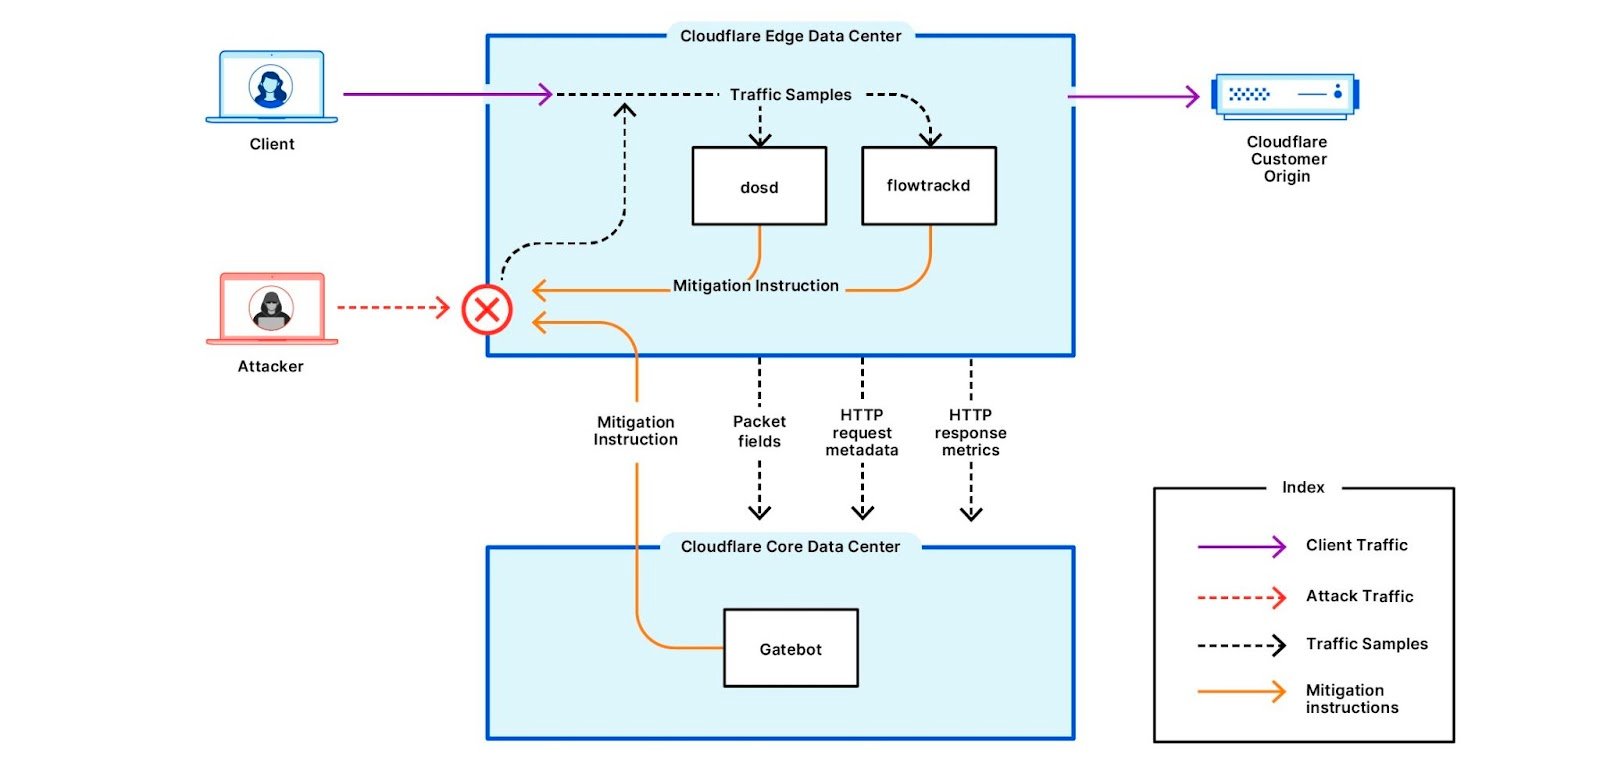 Cloudflare’s DDoS mitigation capabilities include edge detection systems